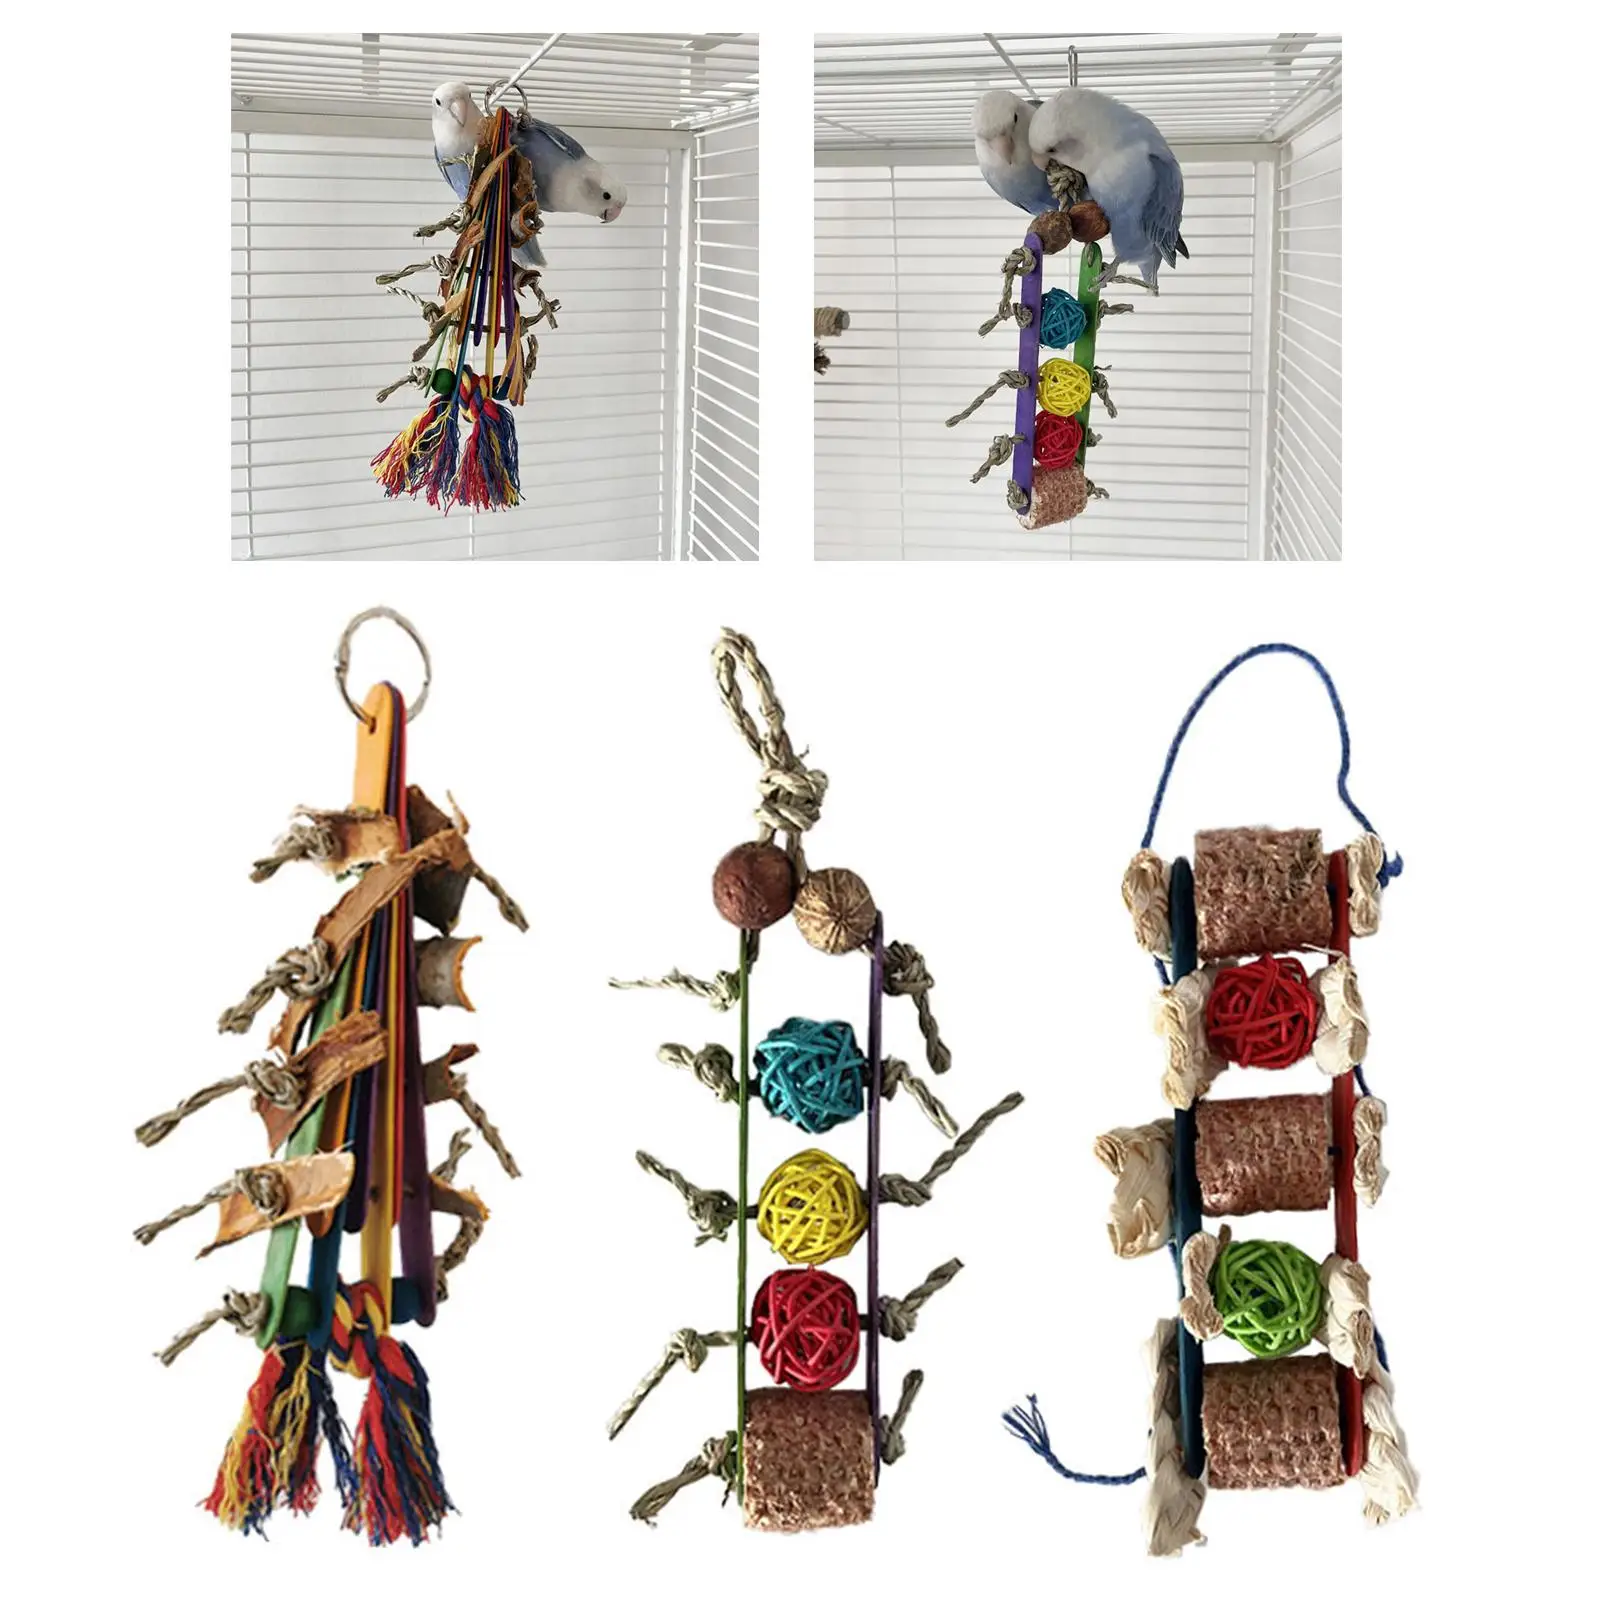 Parrot Cage Hanging Toys Birds Chewing Bite Small Pet Parakeets Nest Swing